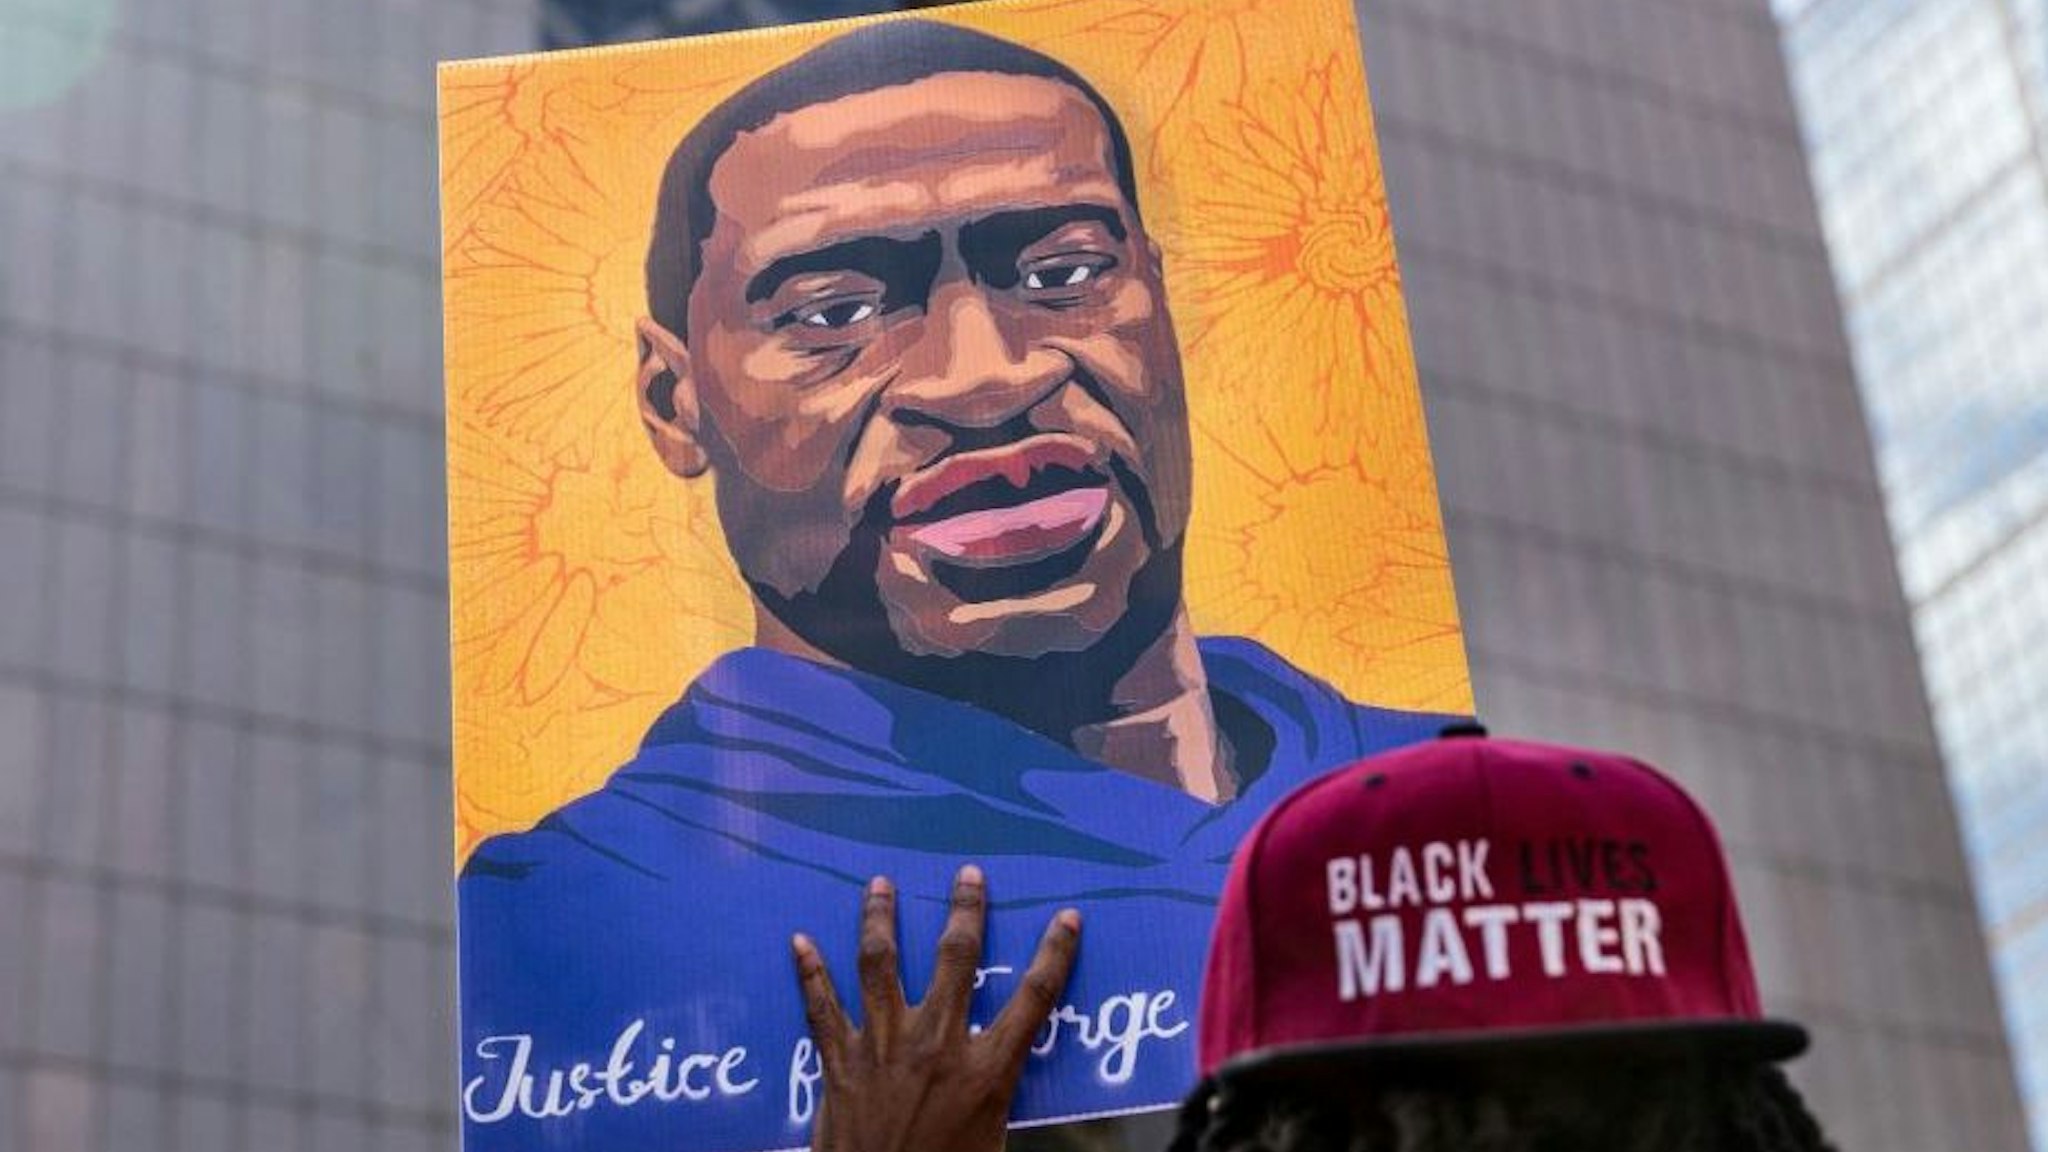 Demonstrators hold signs honouring George Floyd and other victims of racism as they gather during a protest outside Hennepin County Government Center on March 28, 2021 in Minneapolis, Minnesota.